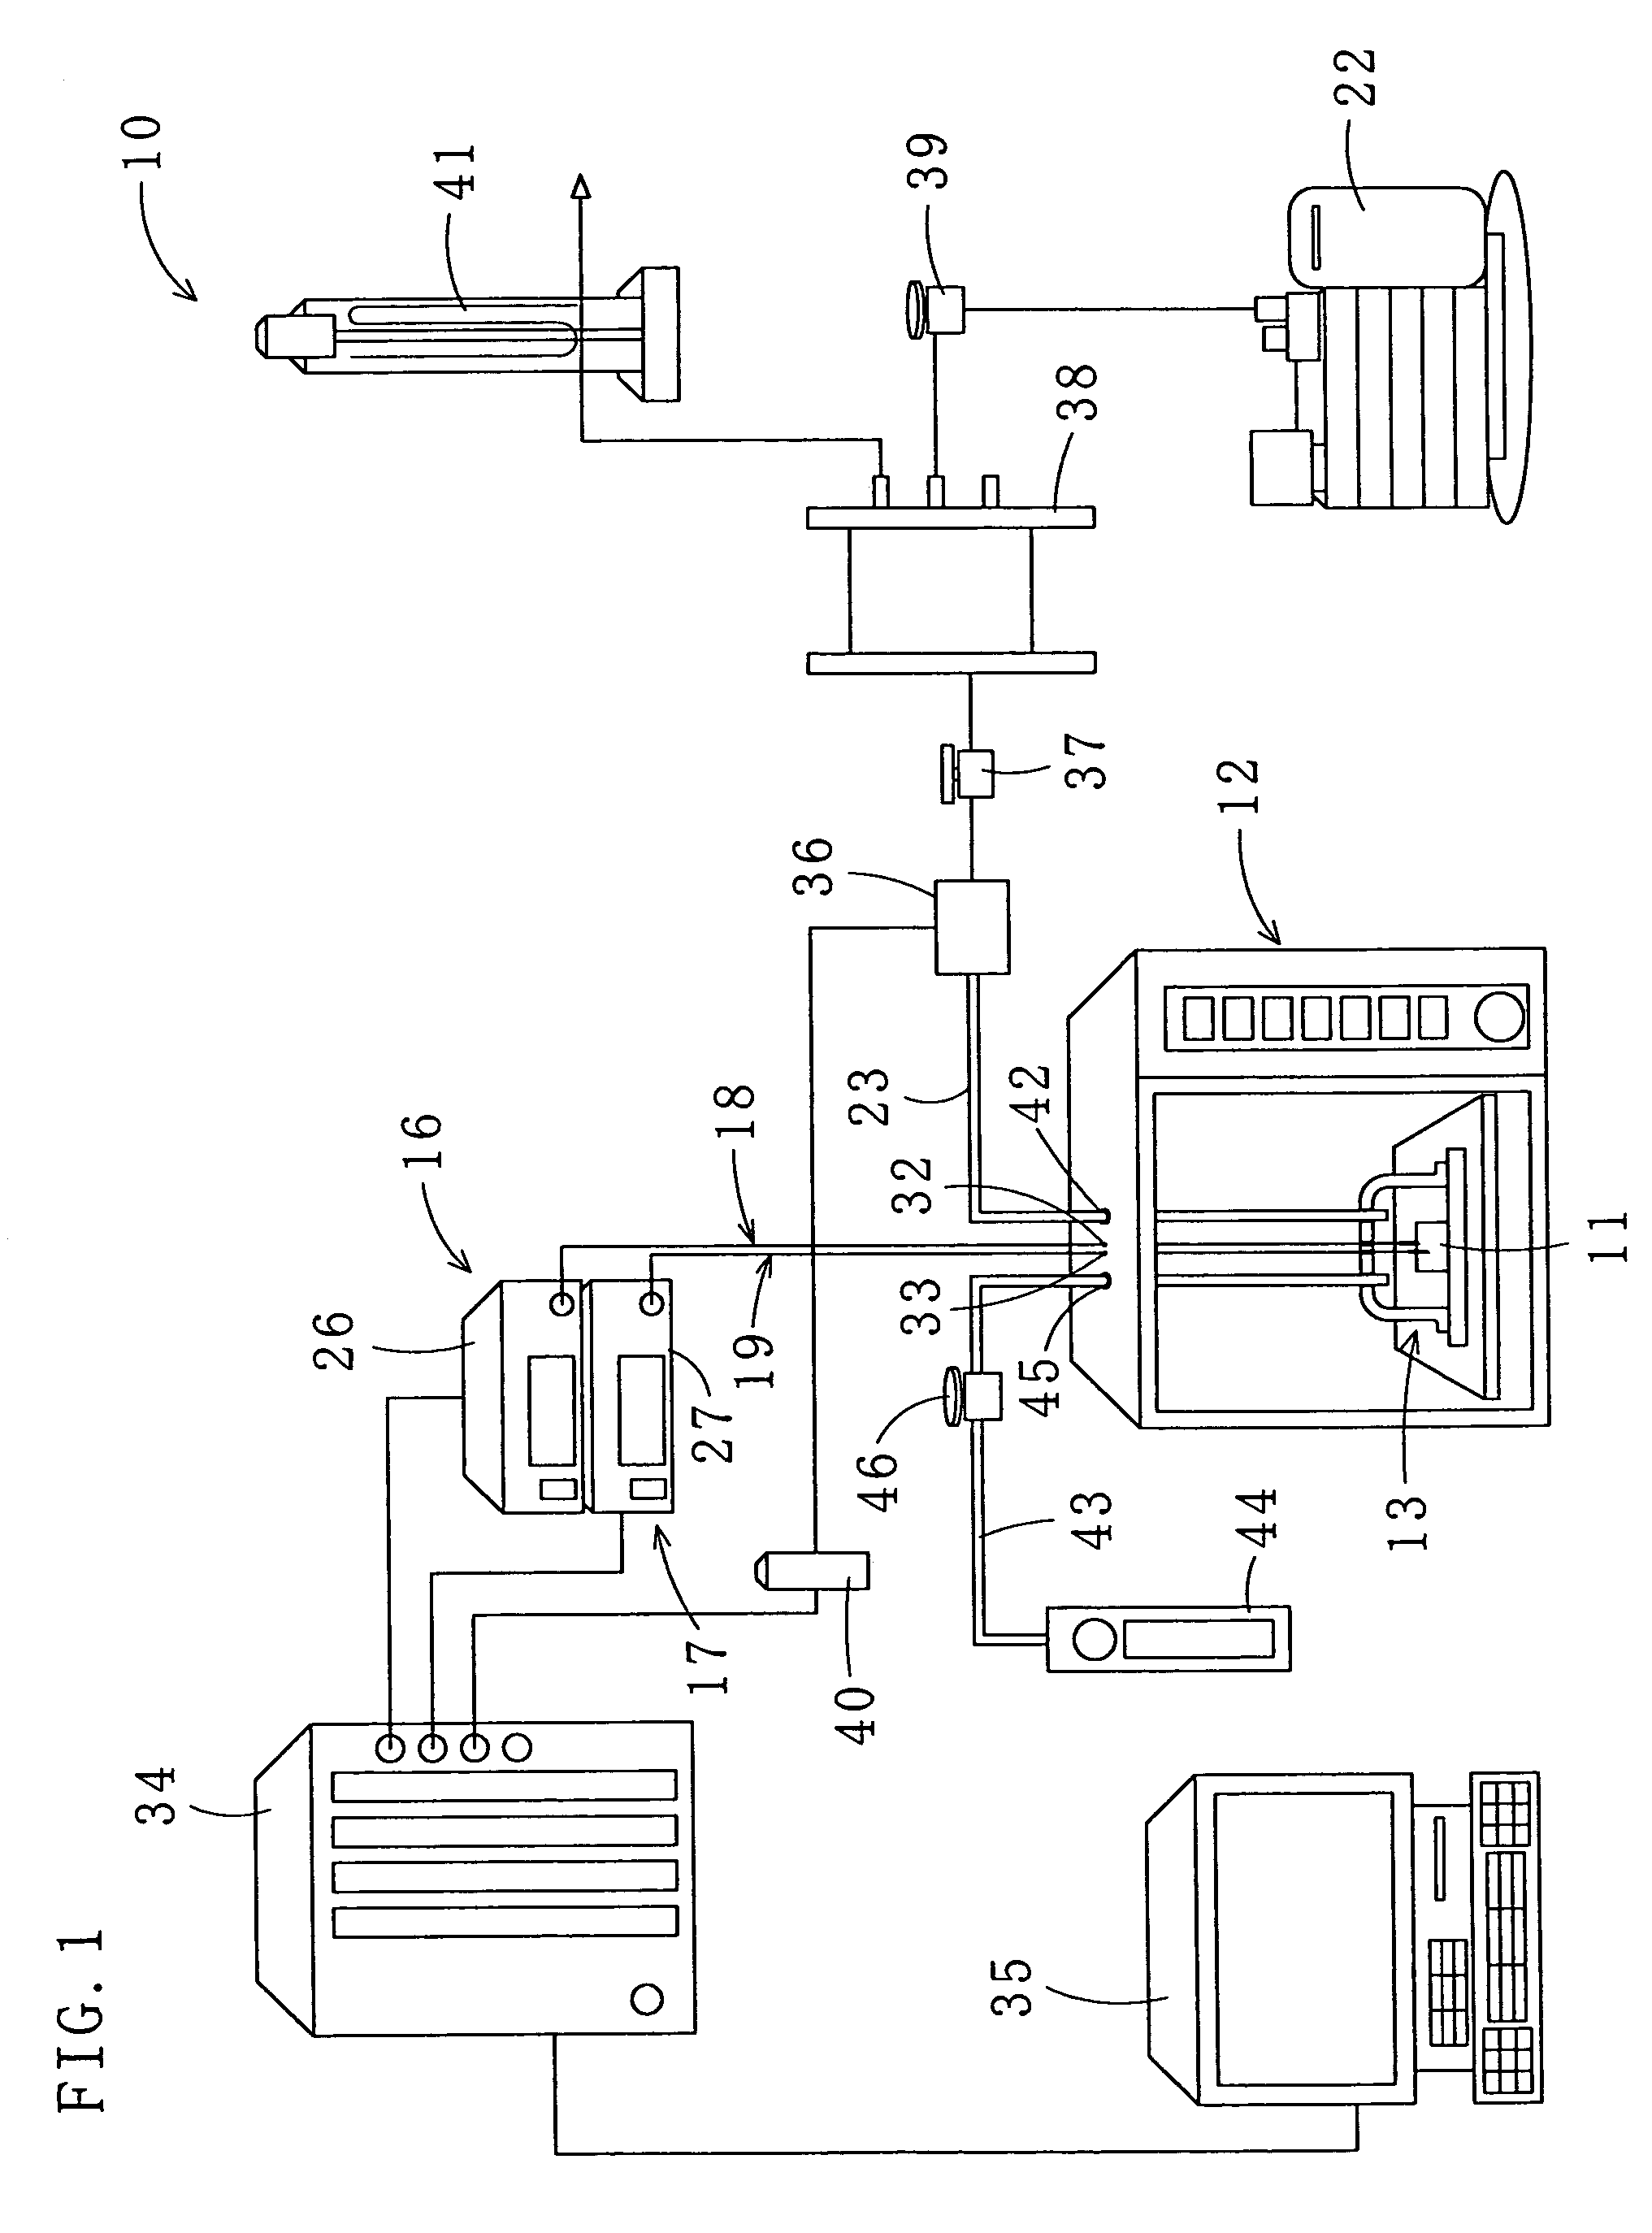 Method for drying under reduced pressure using microwaves